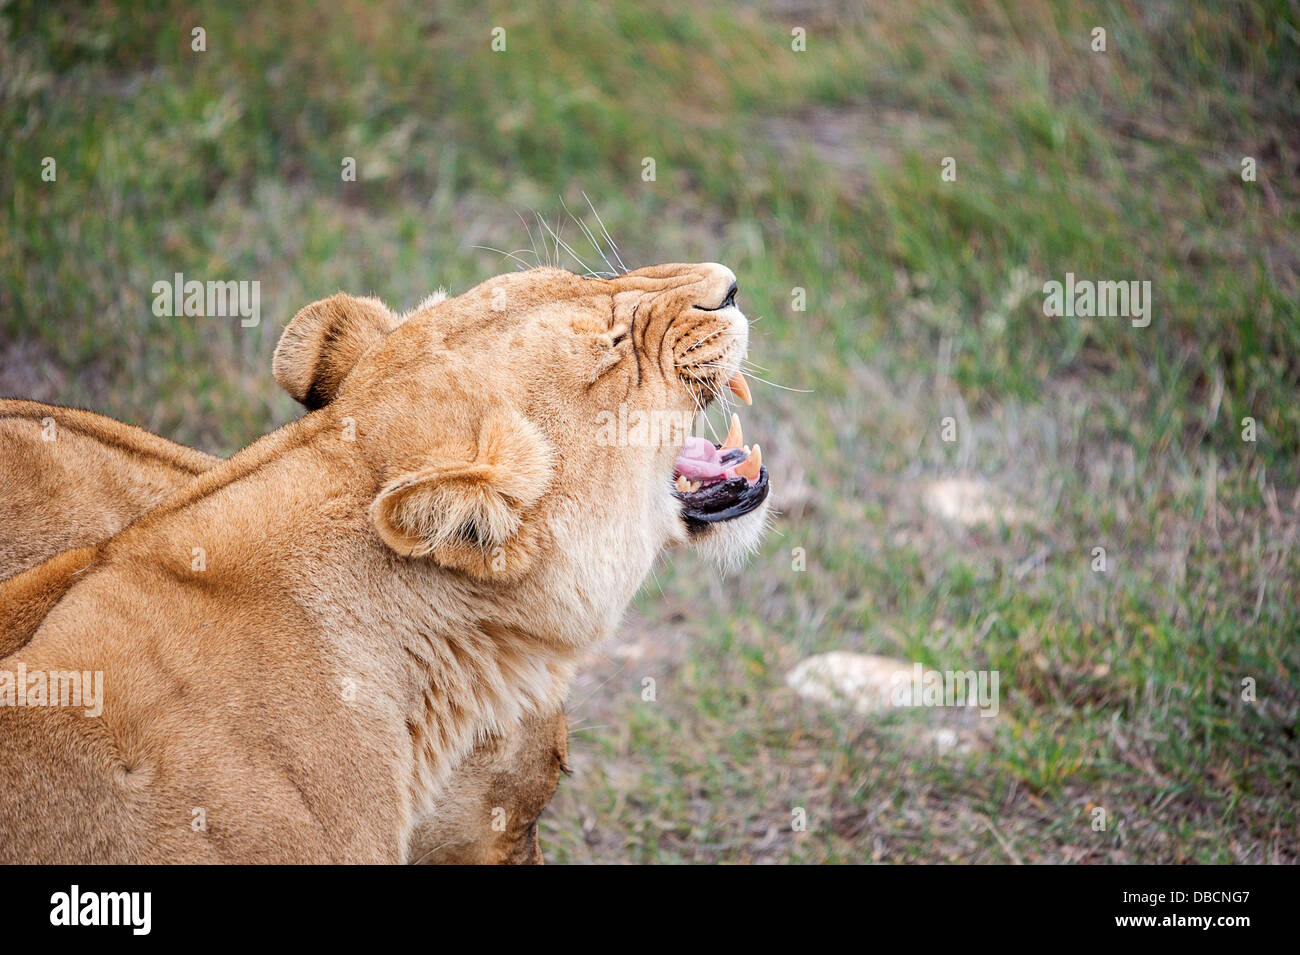 A close-up of a female lion Stock Photo